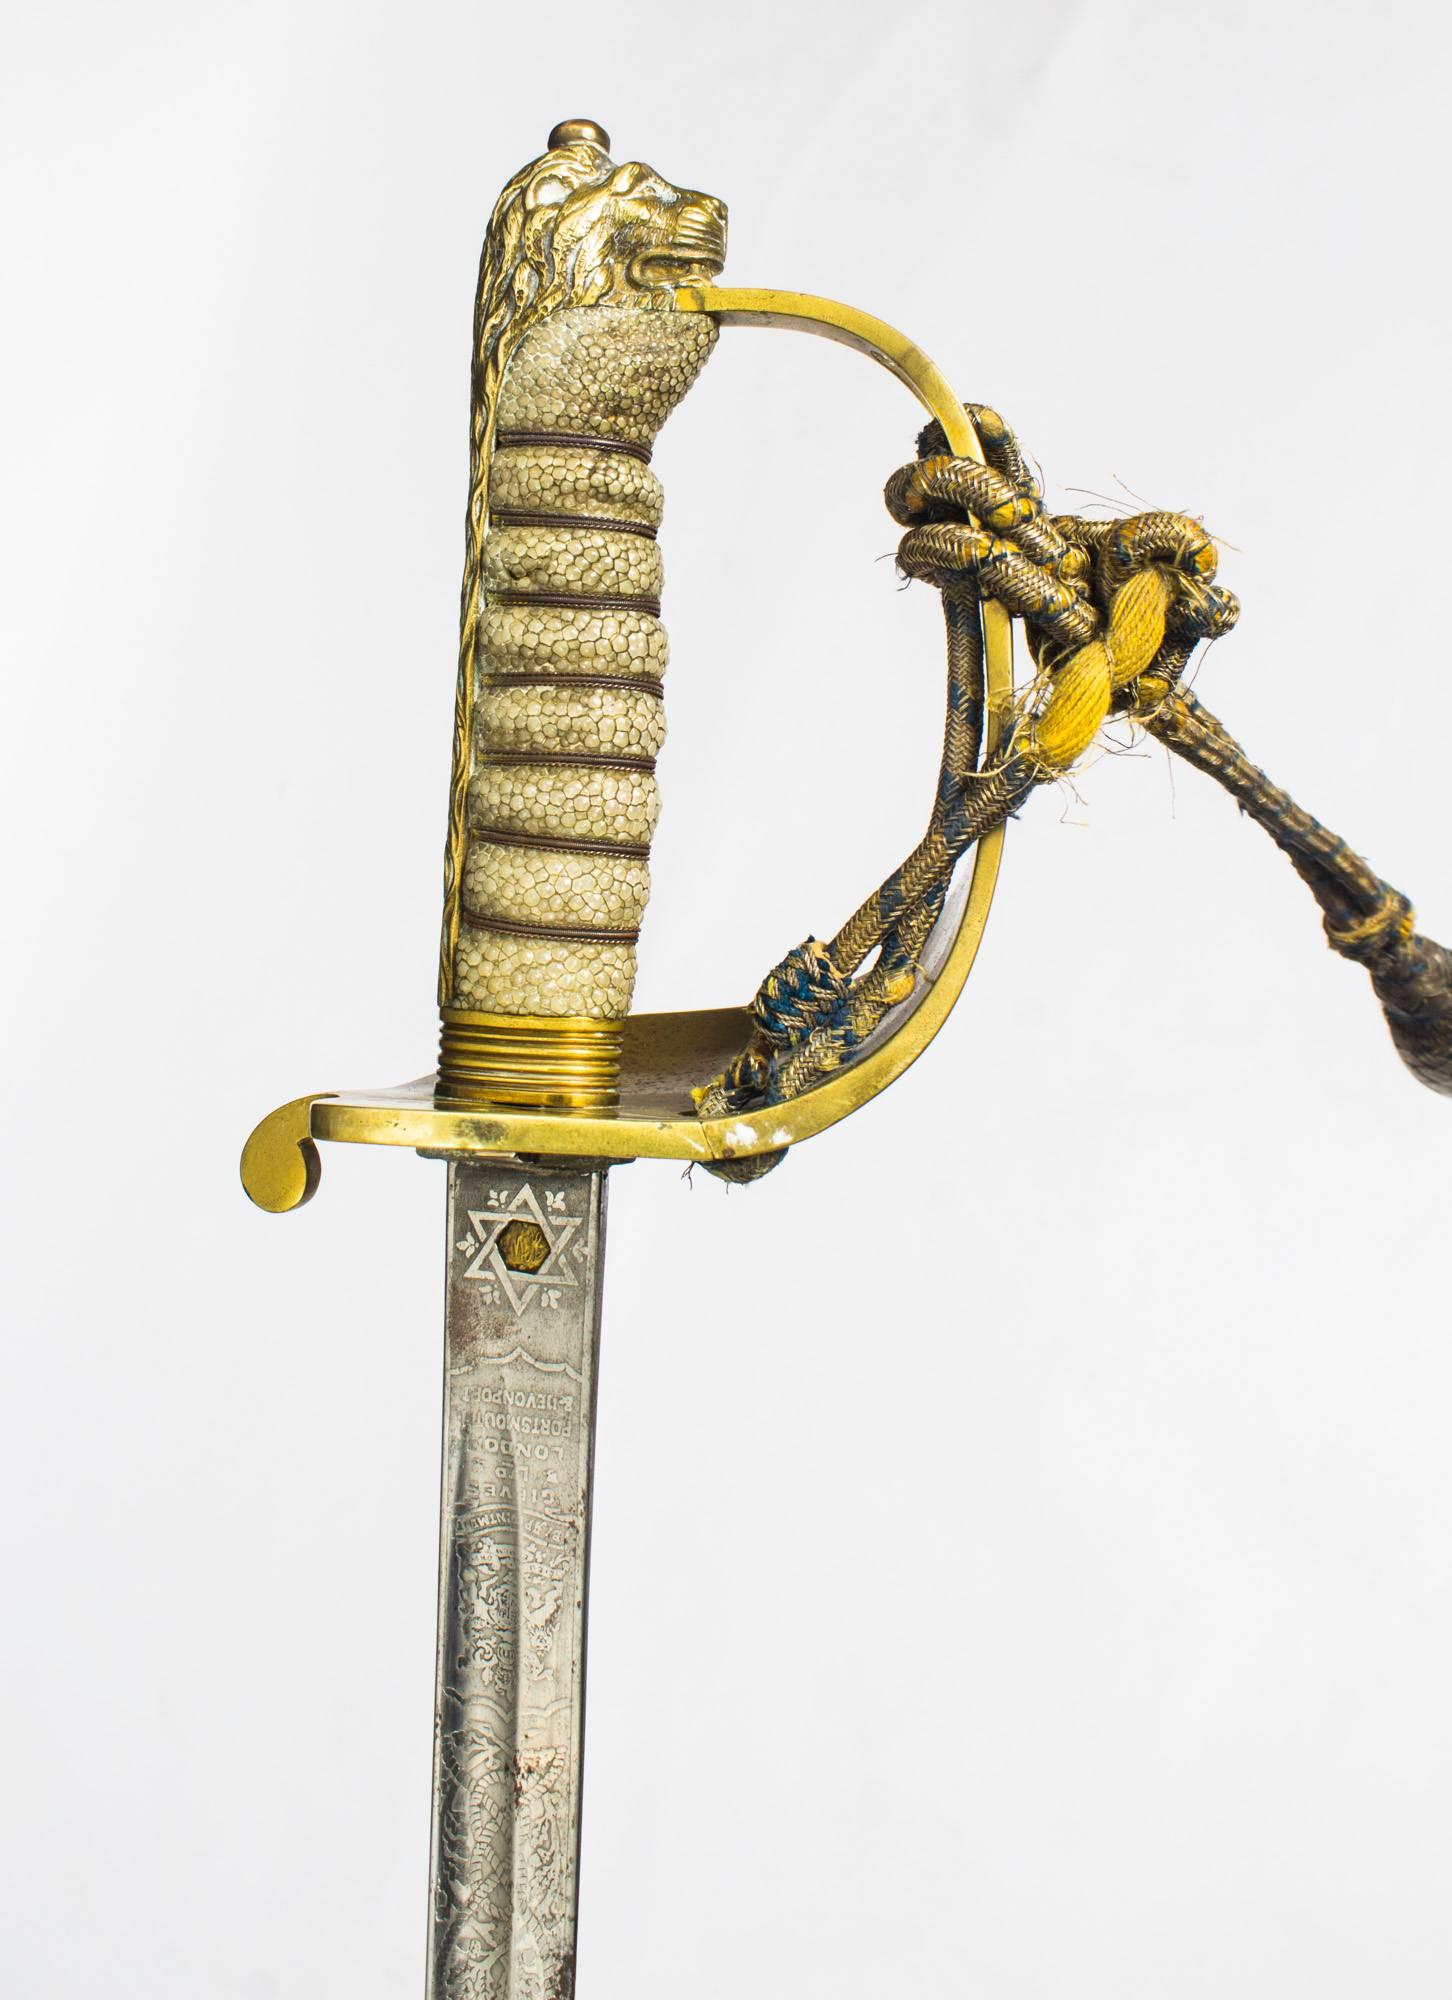 A superb Victorian officers sword in leather mounted scabbard by Henry Wilkinson, Pall Mall, London, retailed by Gieves Ltd of London, dated 1897.

The sword features a brass lions head hilt and has a brass guard with a crown over an anchor and a